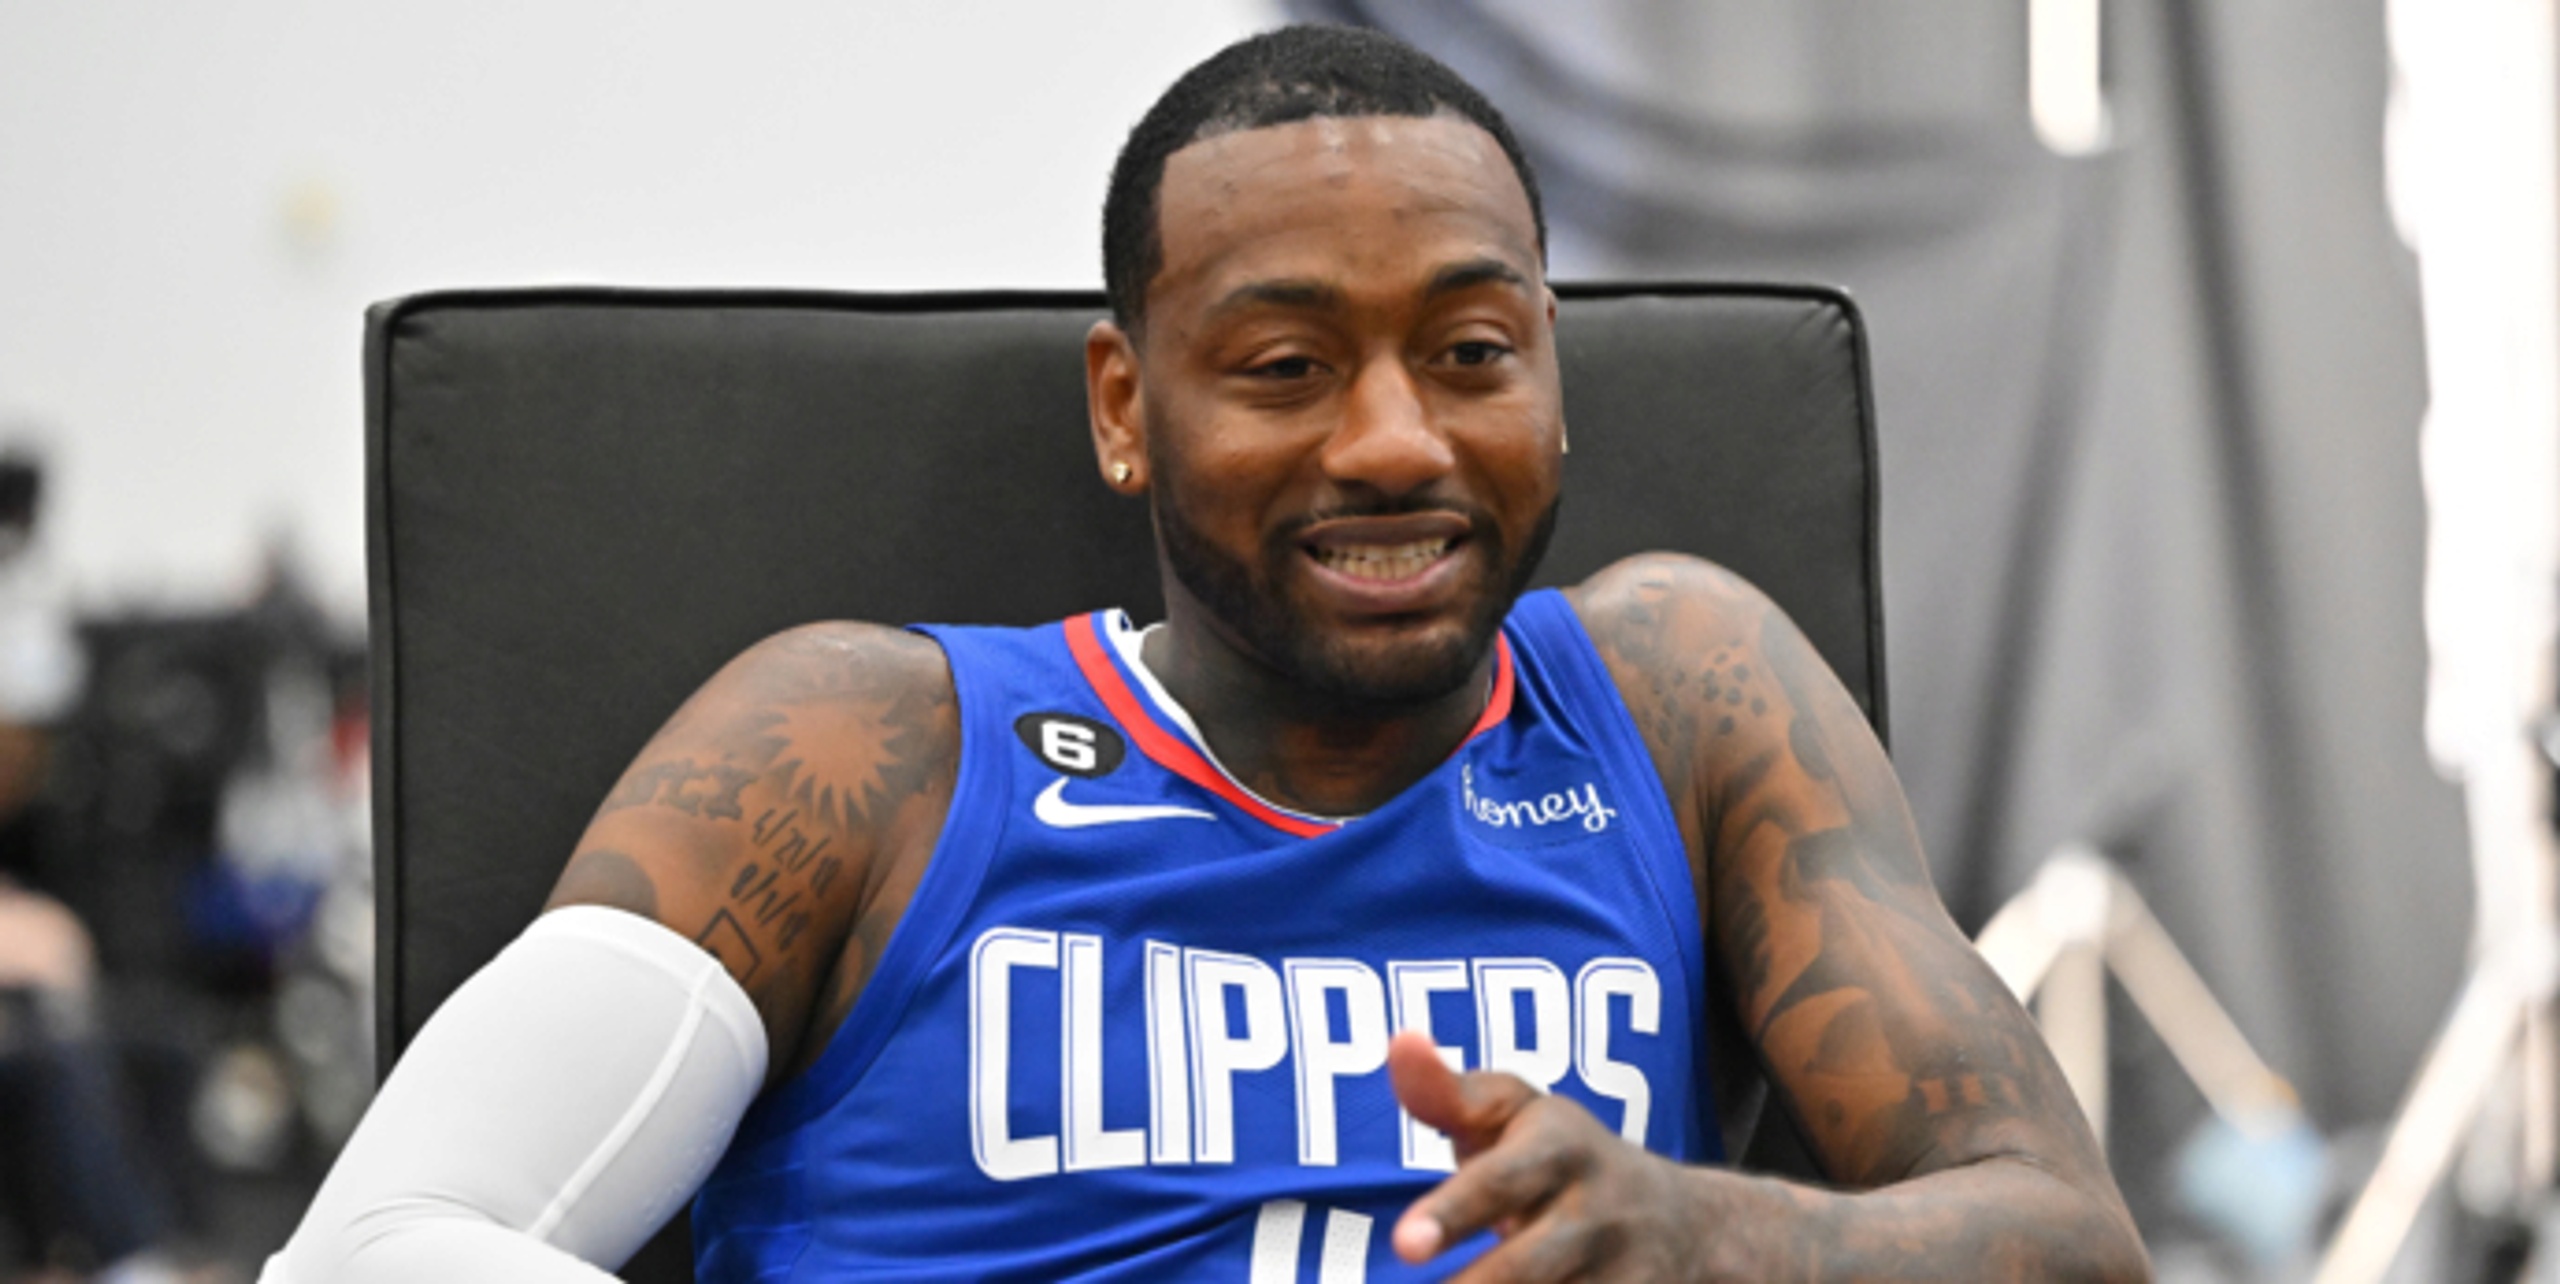 John Wall ready to make his triumphant return with Clippers